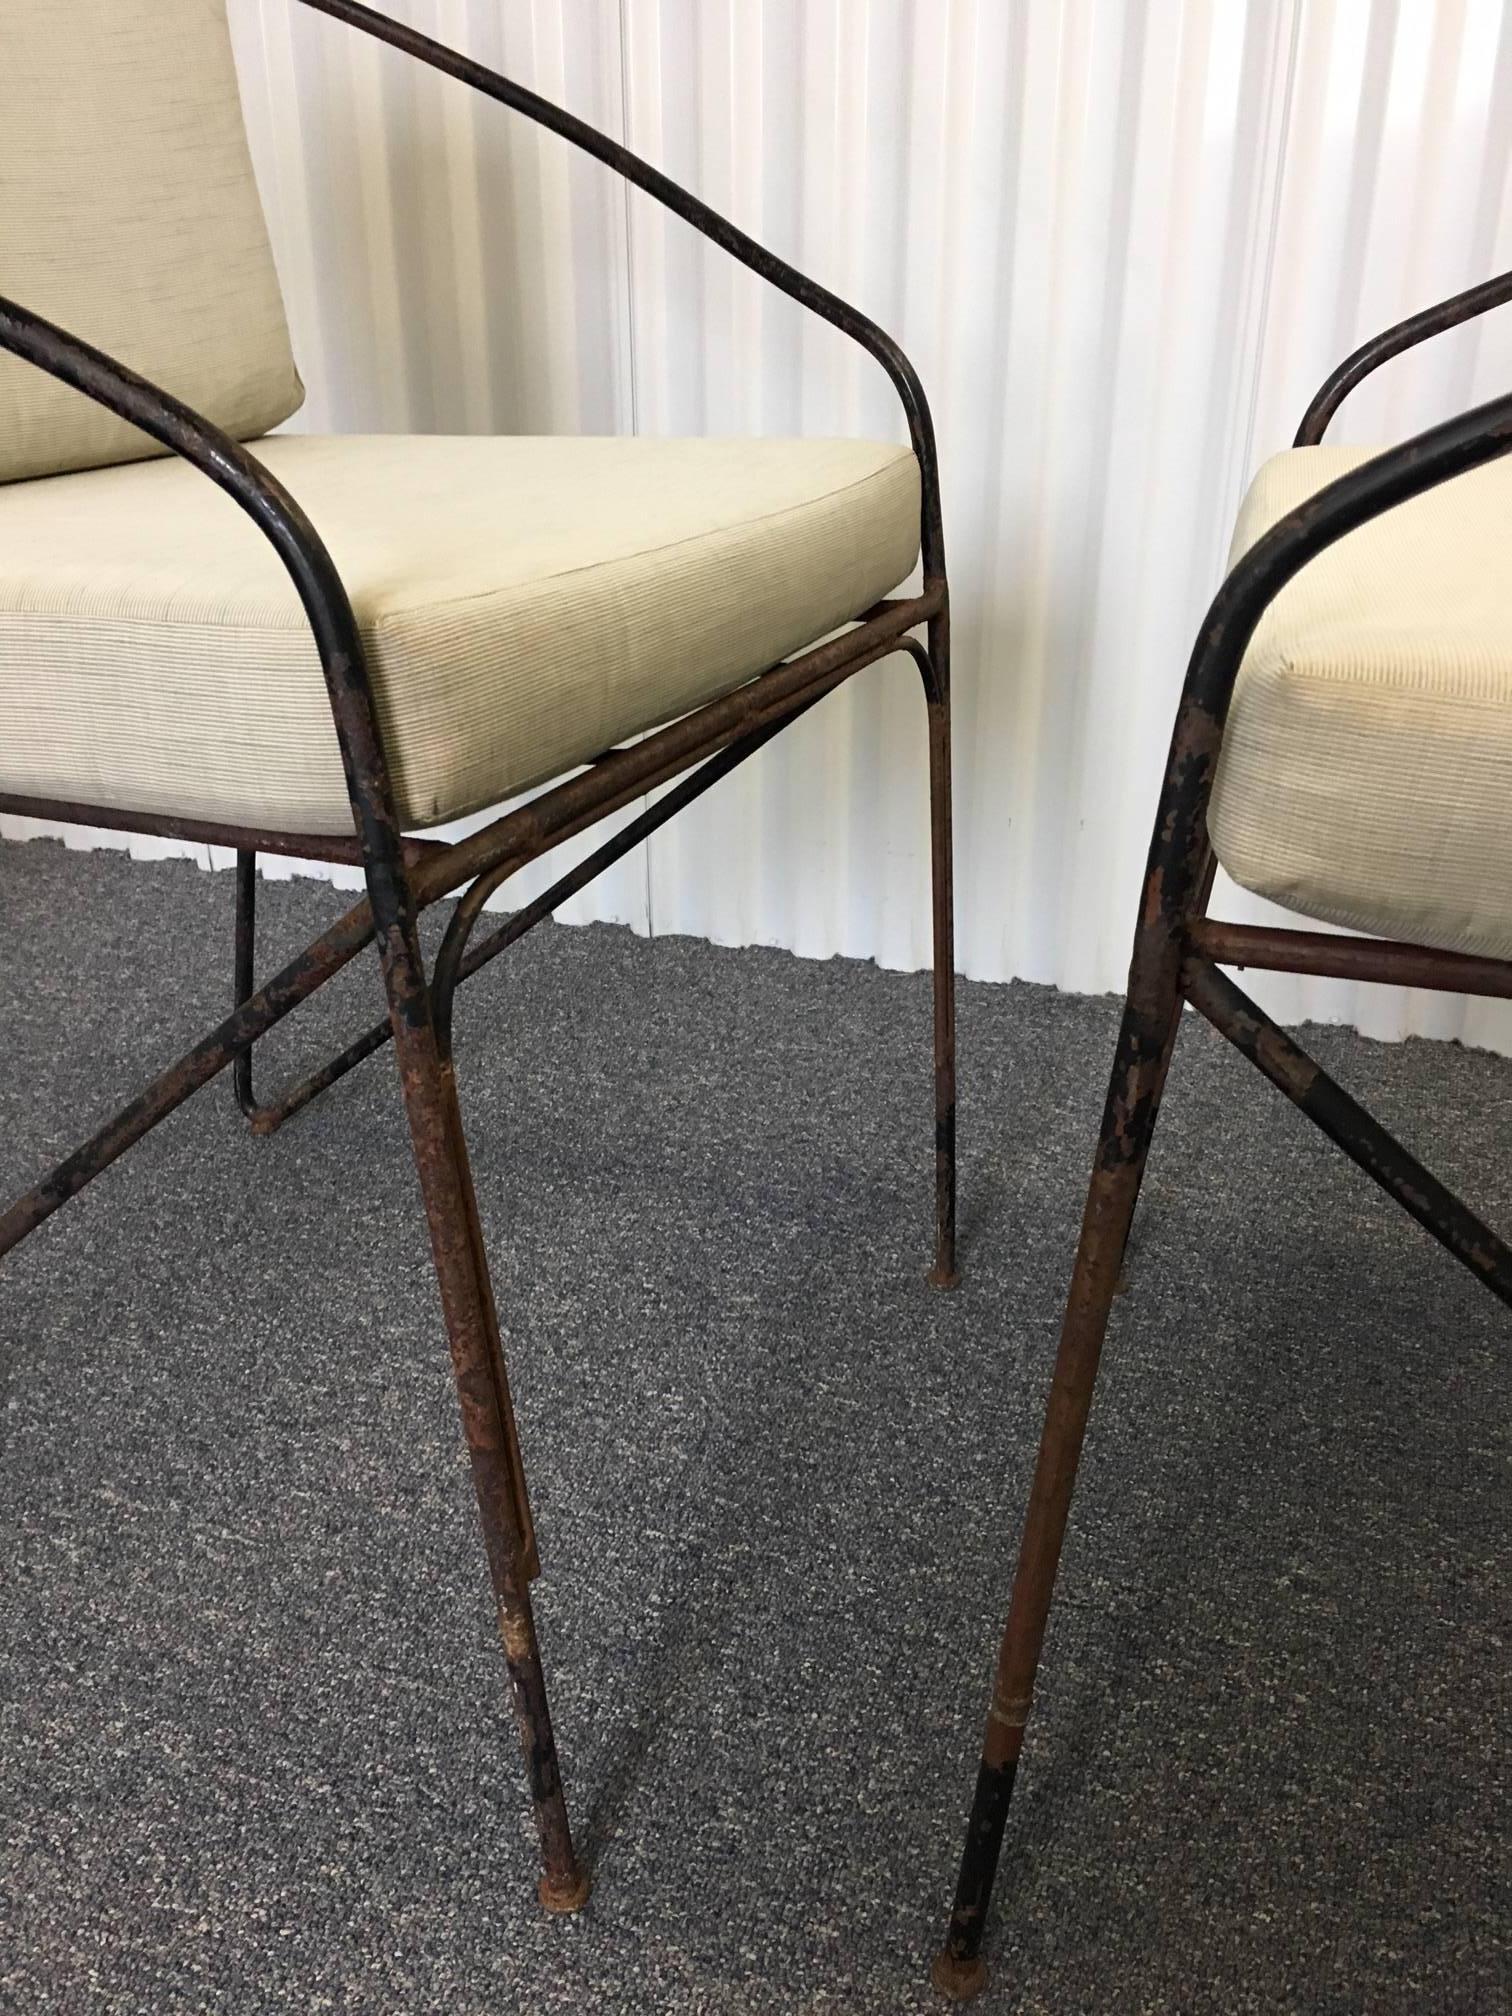 Pair of 19th c. French Iron Armchairs 1